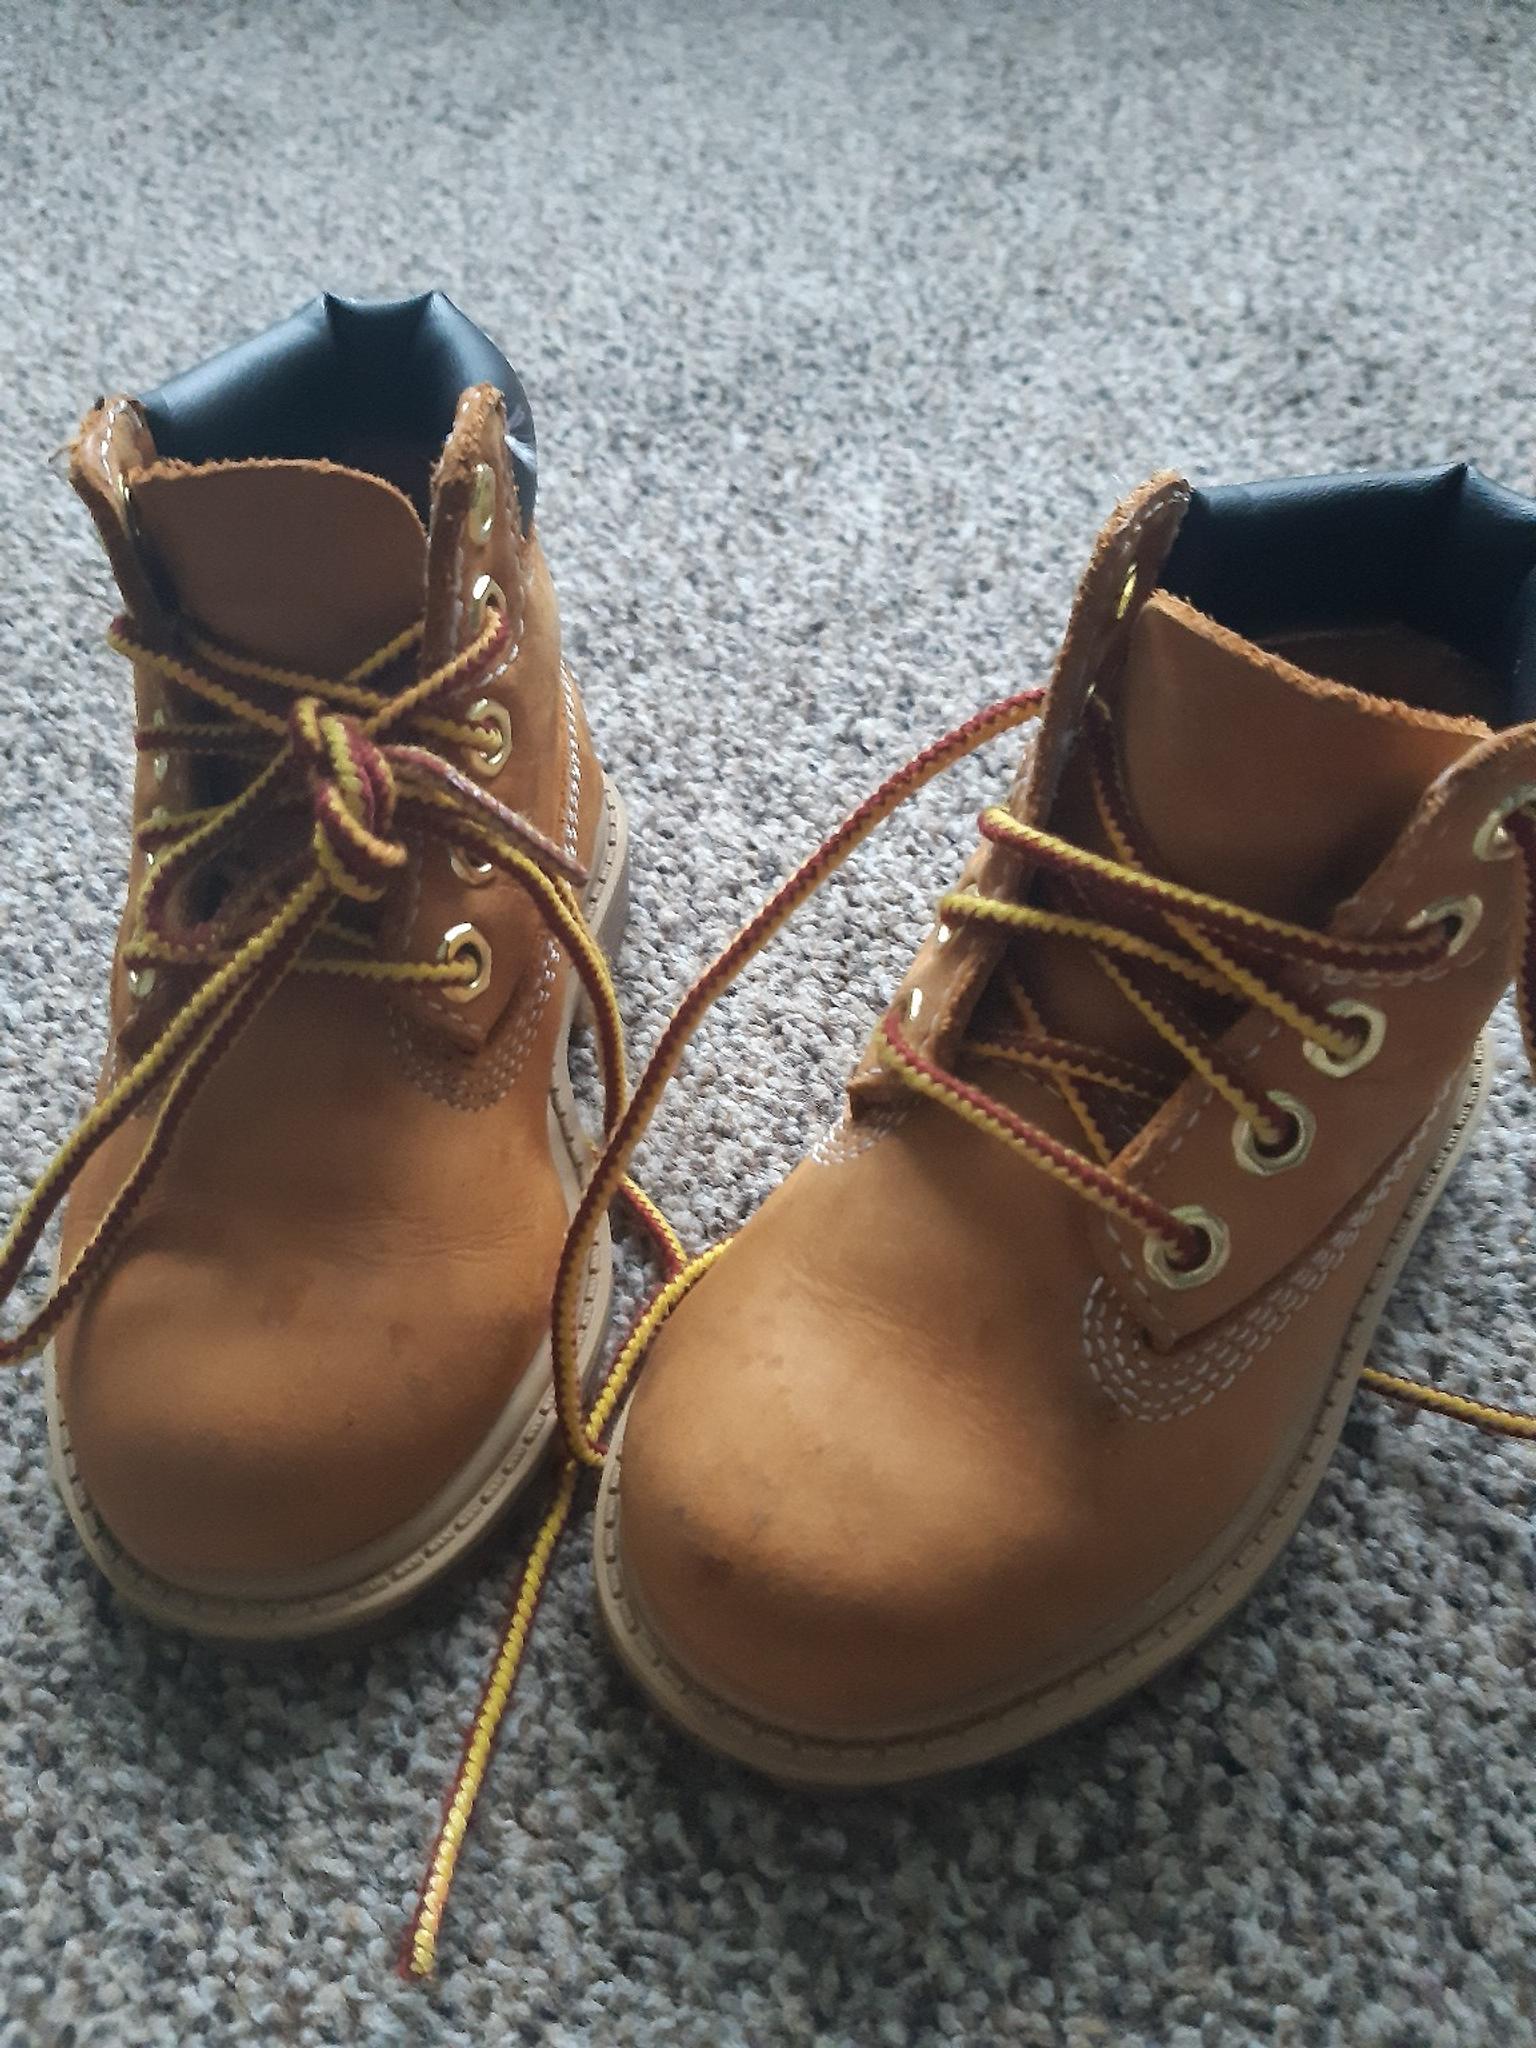 childrens size 5 timberland boots